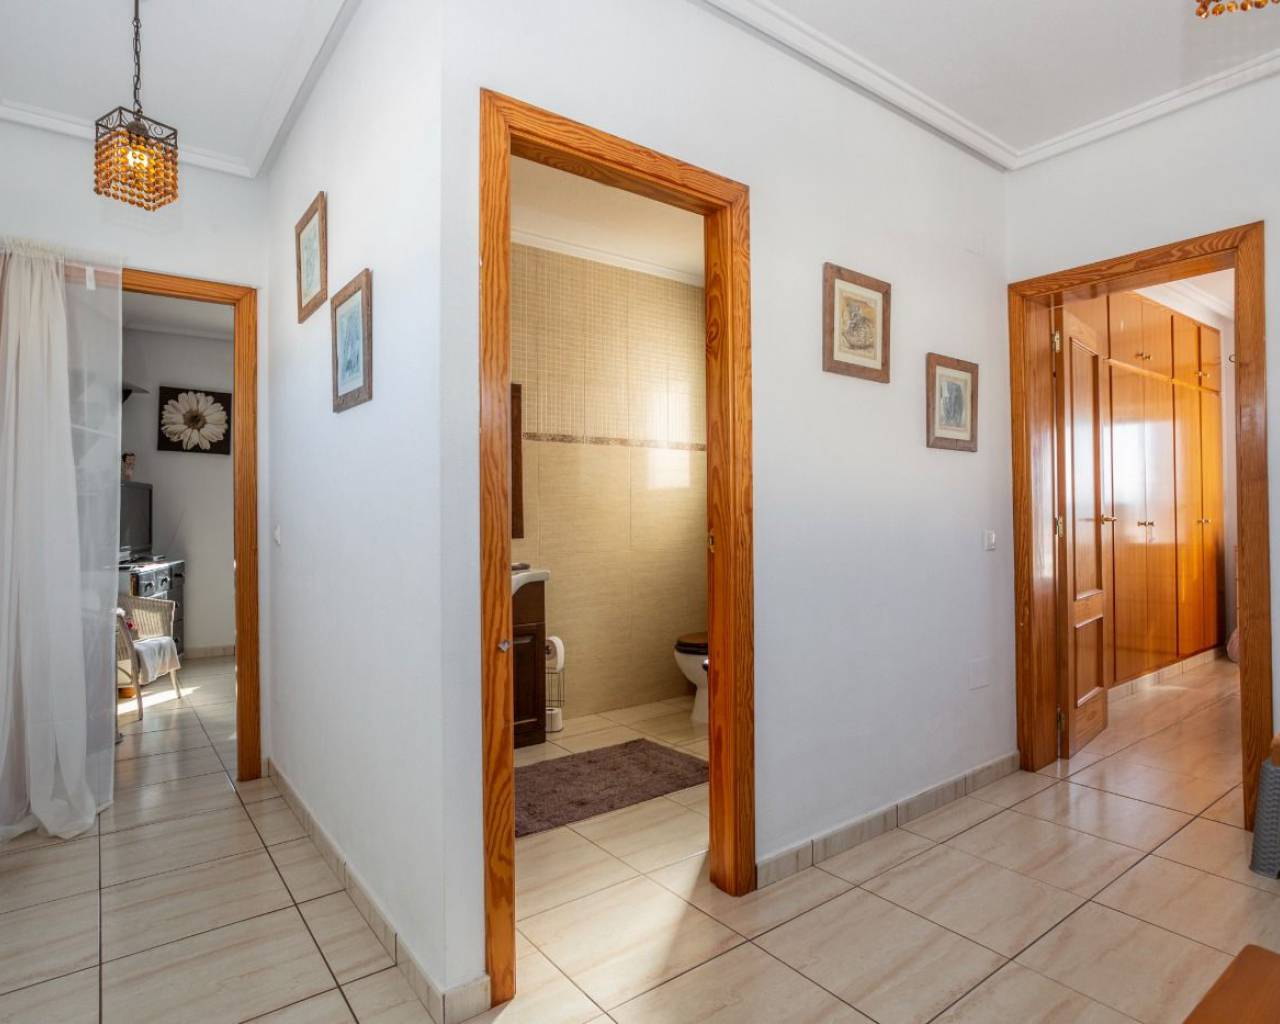 Sale - House with land - Torrevieja - El chaparral